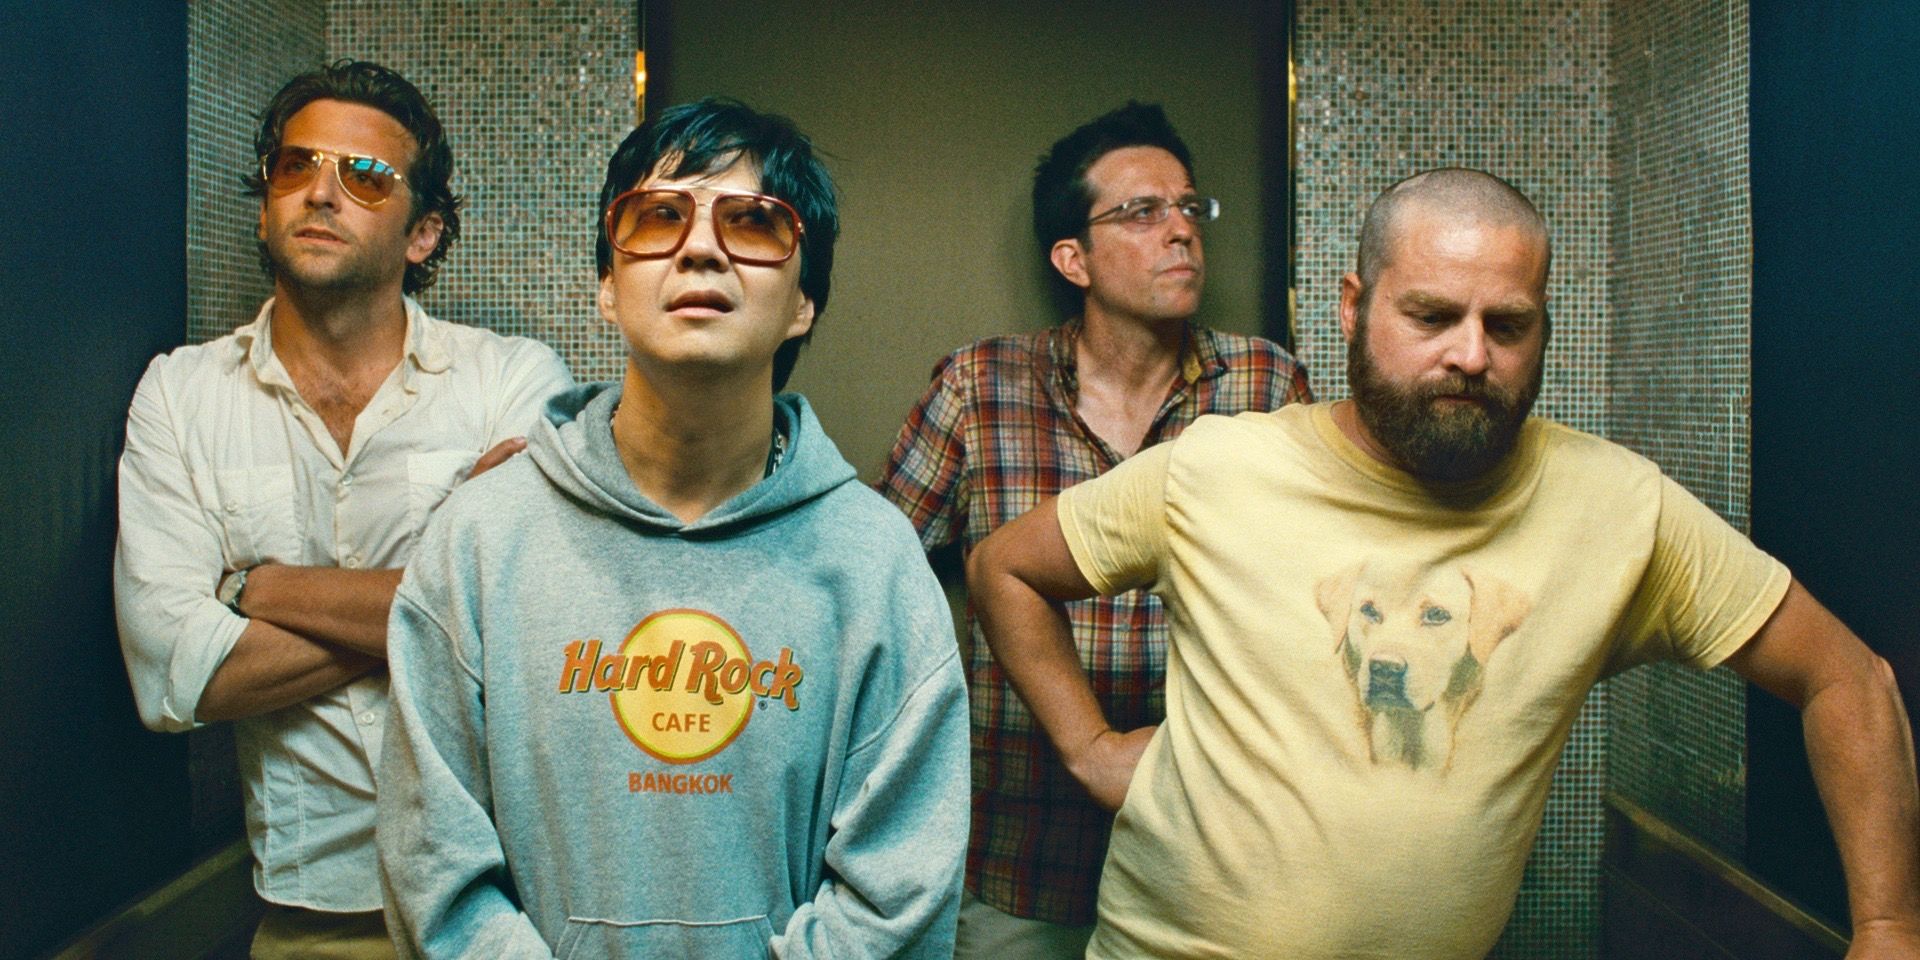 the hangover quotes mr chow